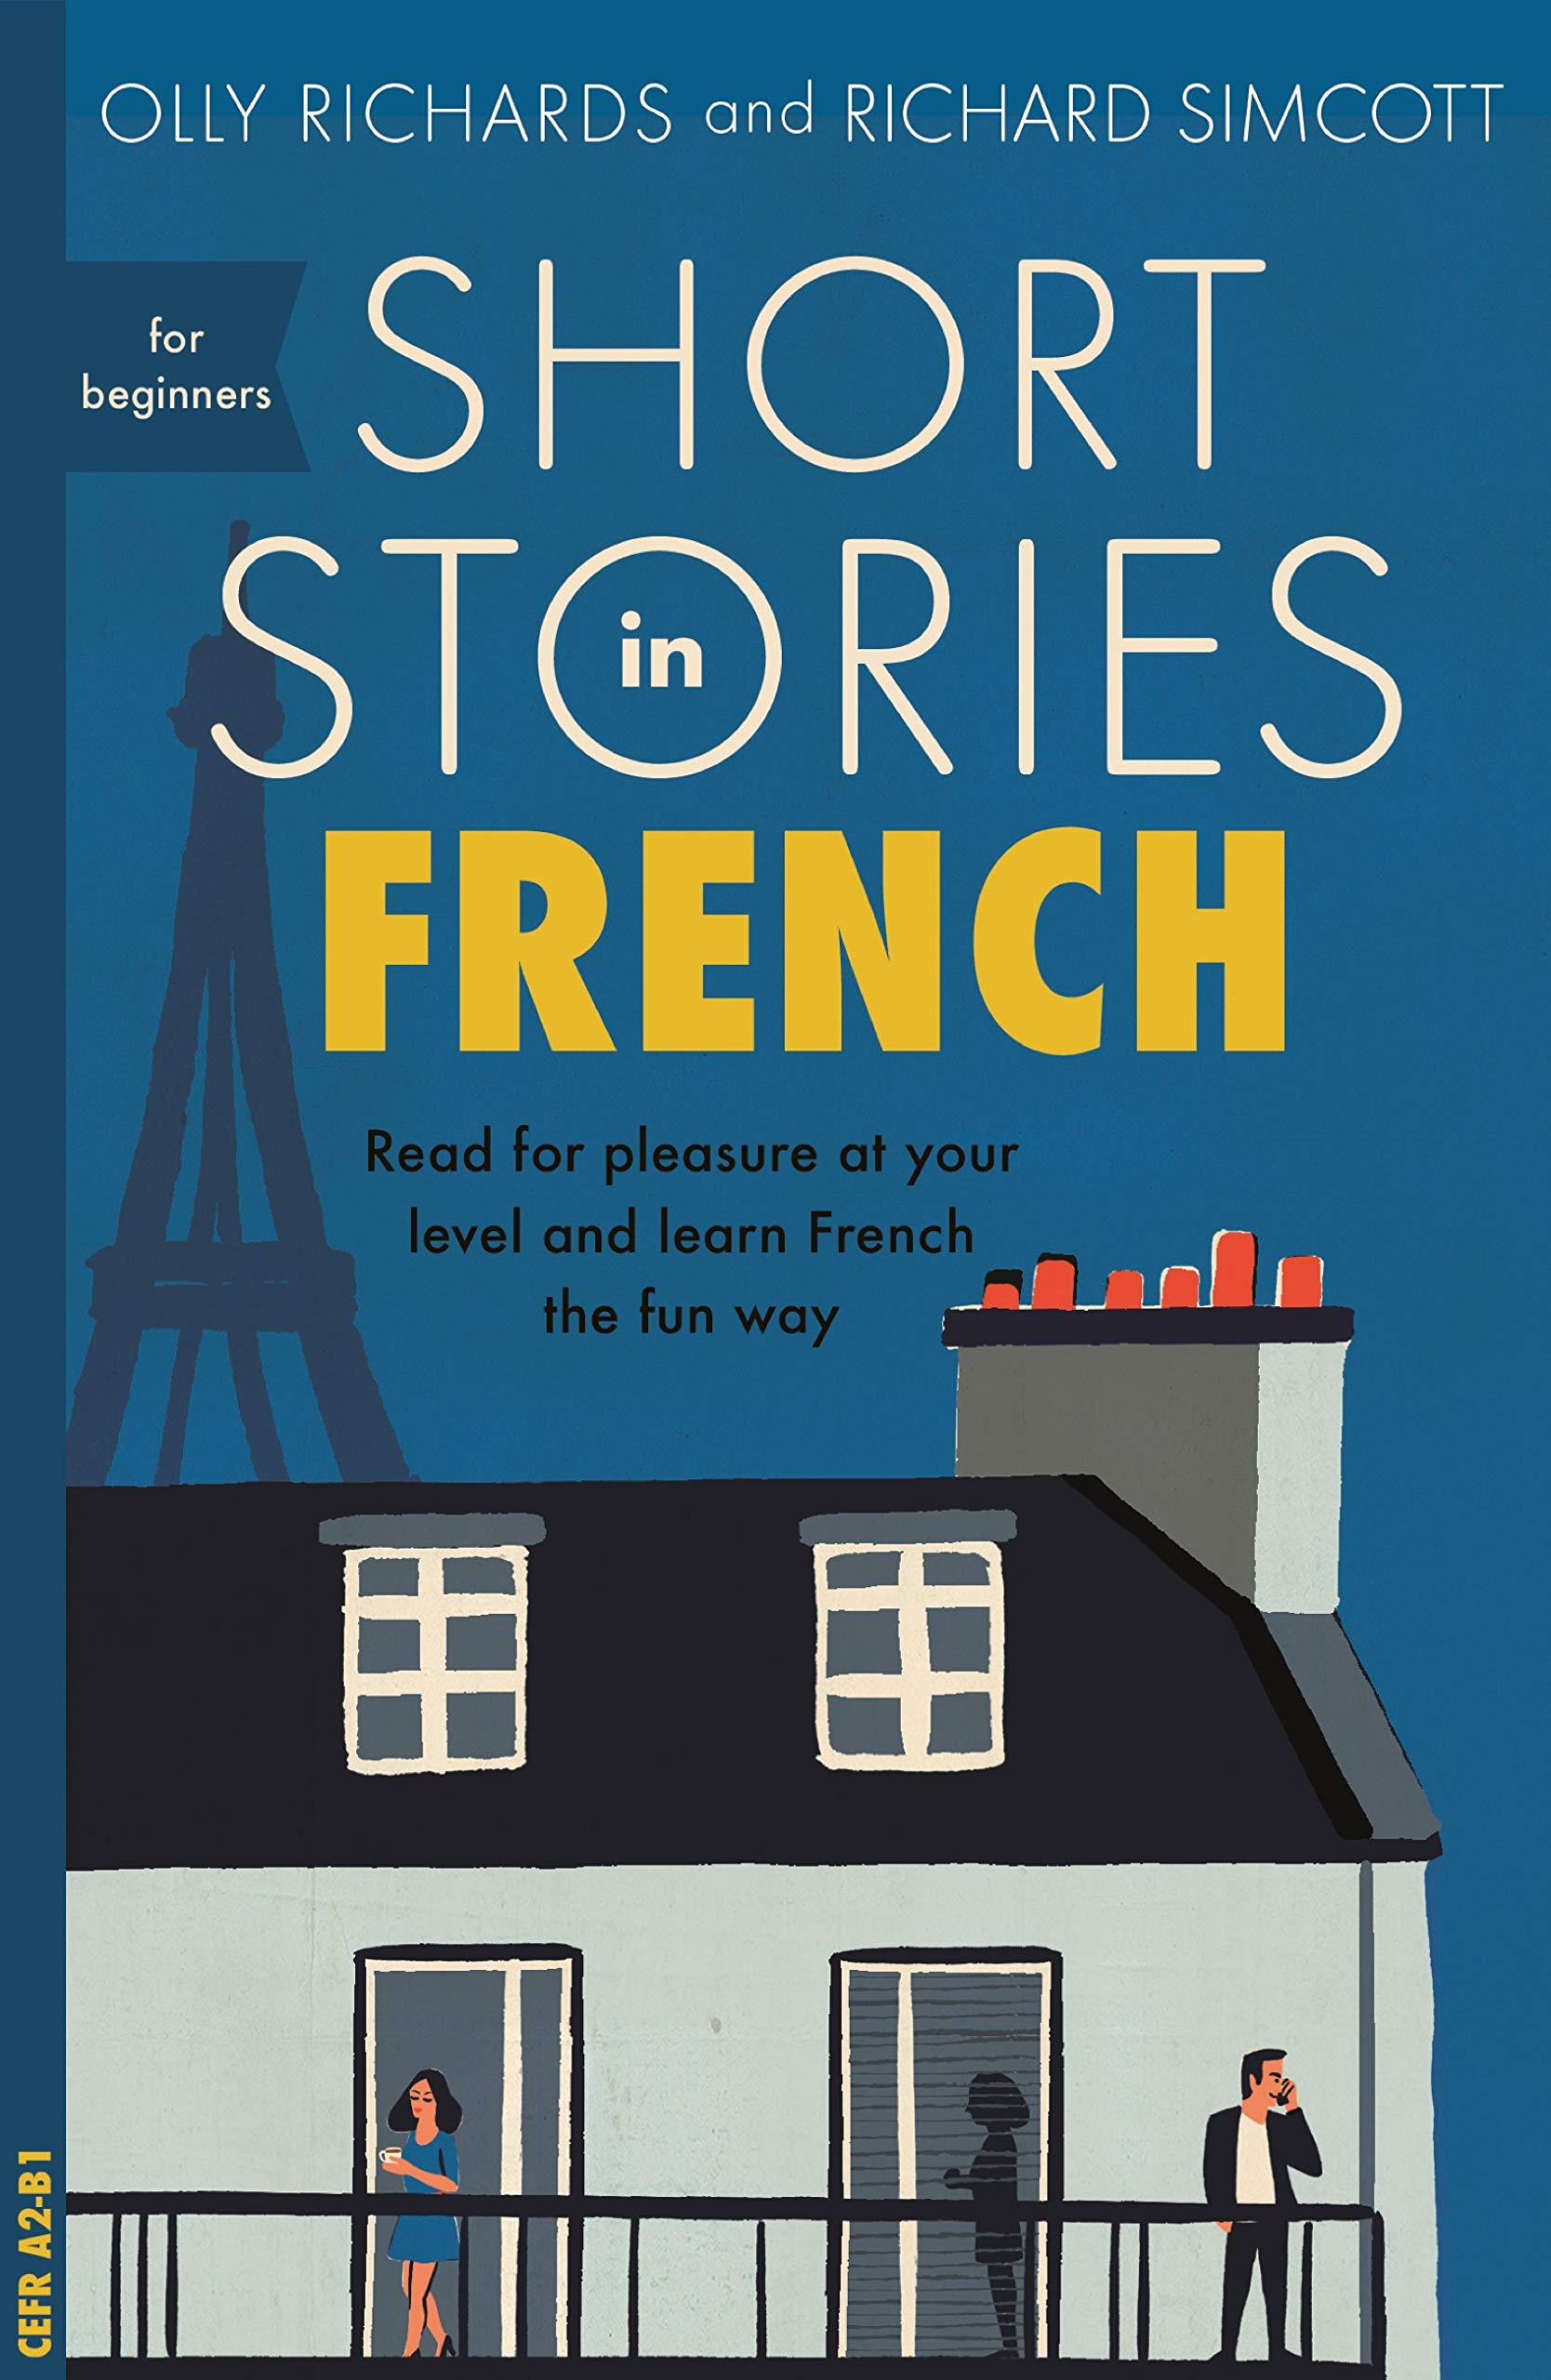 Short Stories in French for Beginners: Read for pleasure at your level, expand your vocabulary and learn French the fun way! (Teach Yourself Short Stories) (French Edition)